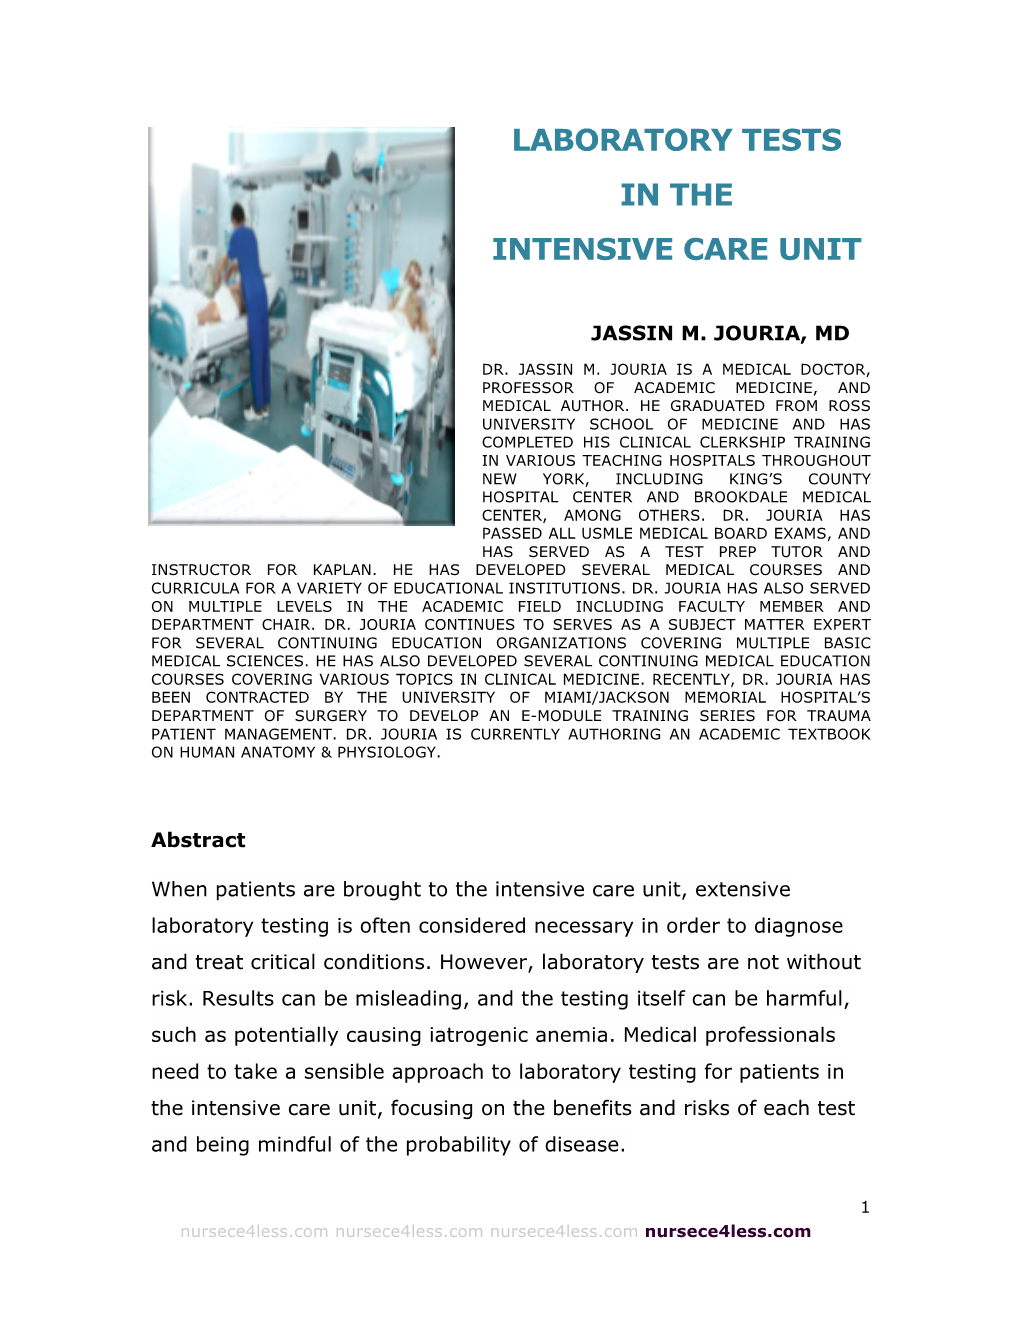 Laboratory Tests in the Intensive Care Unit